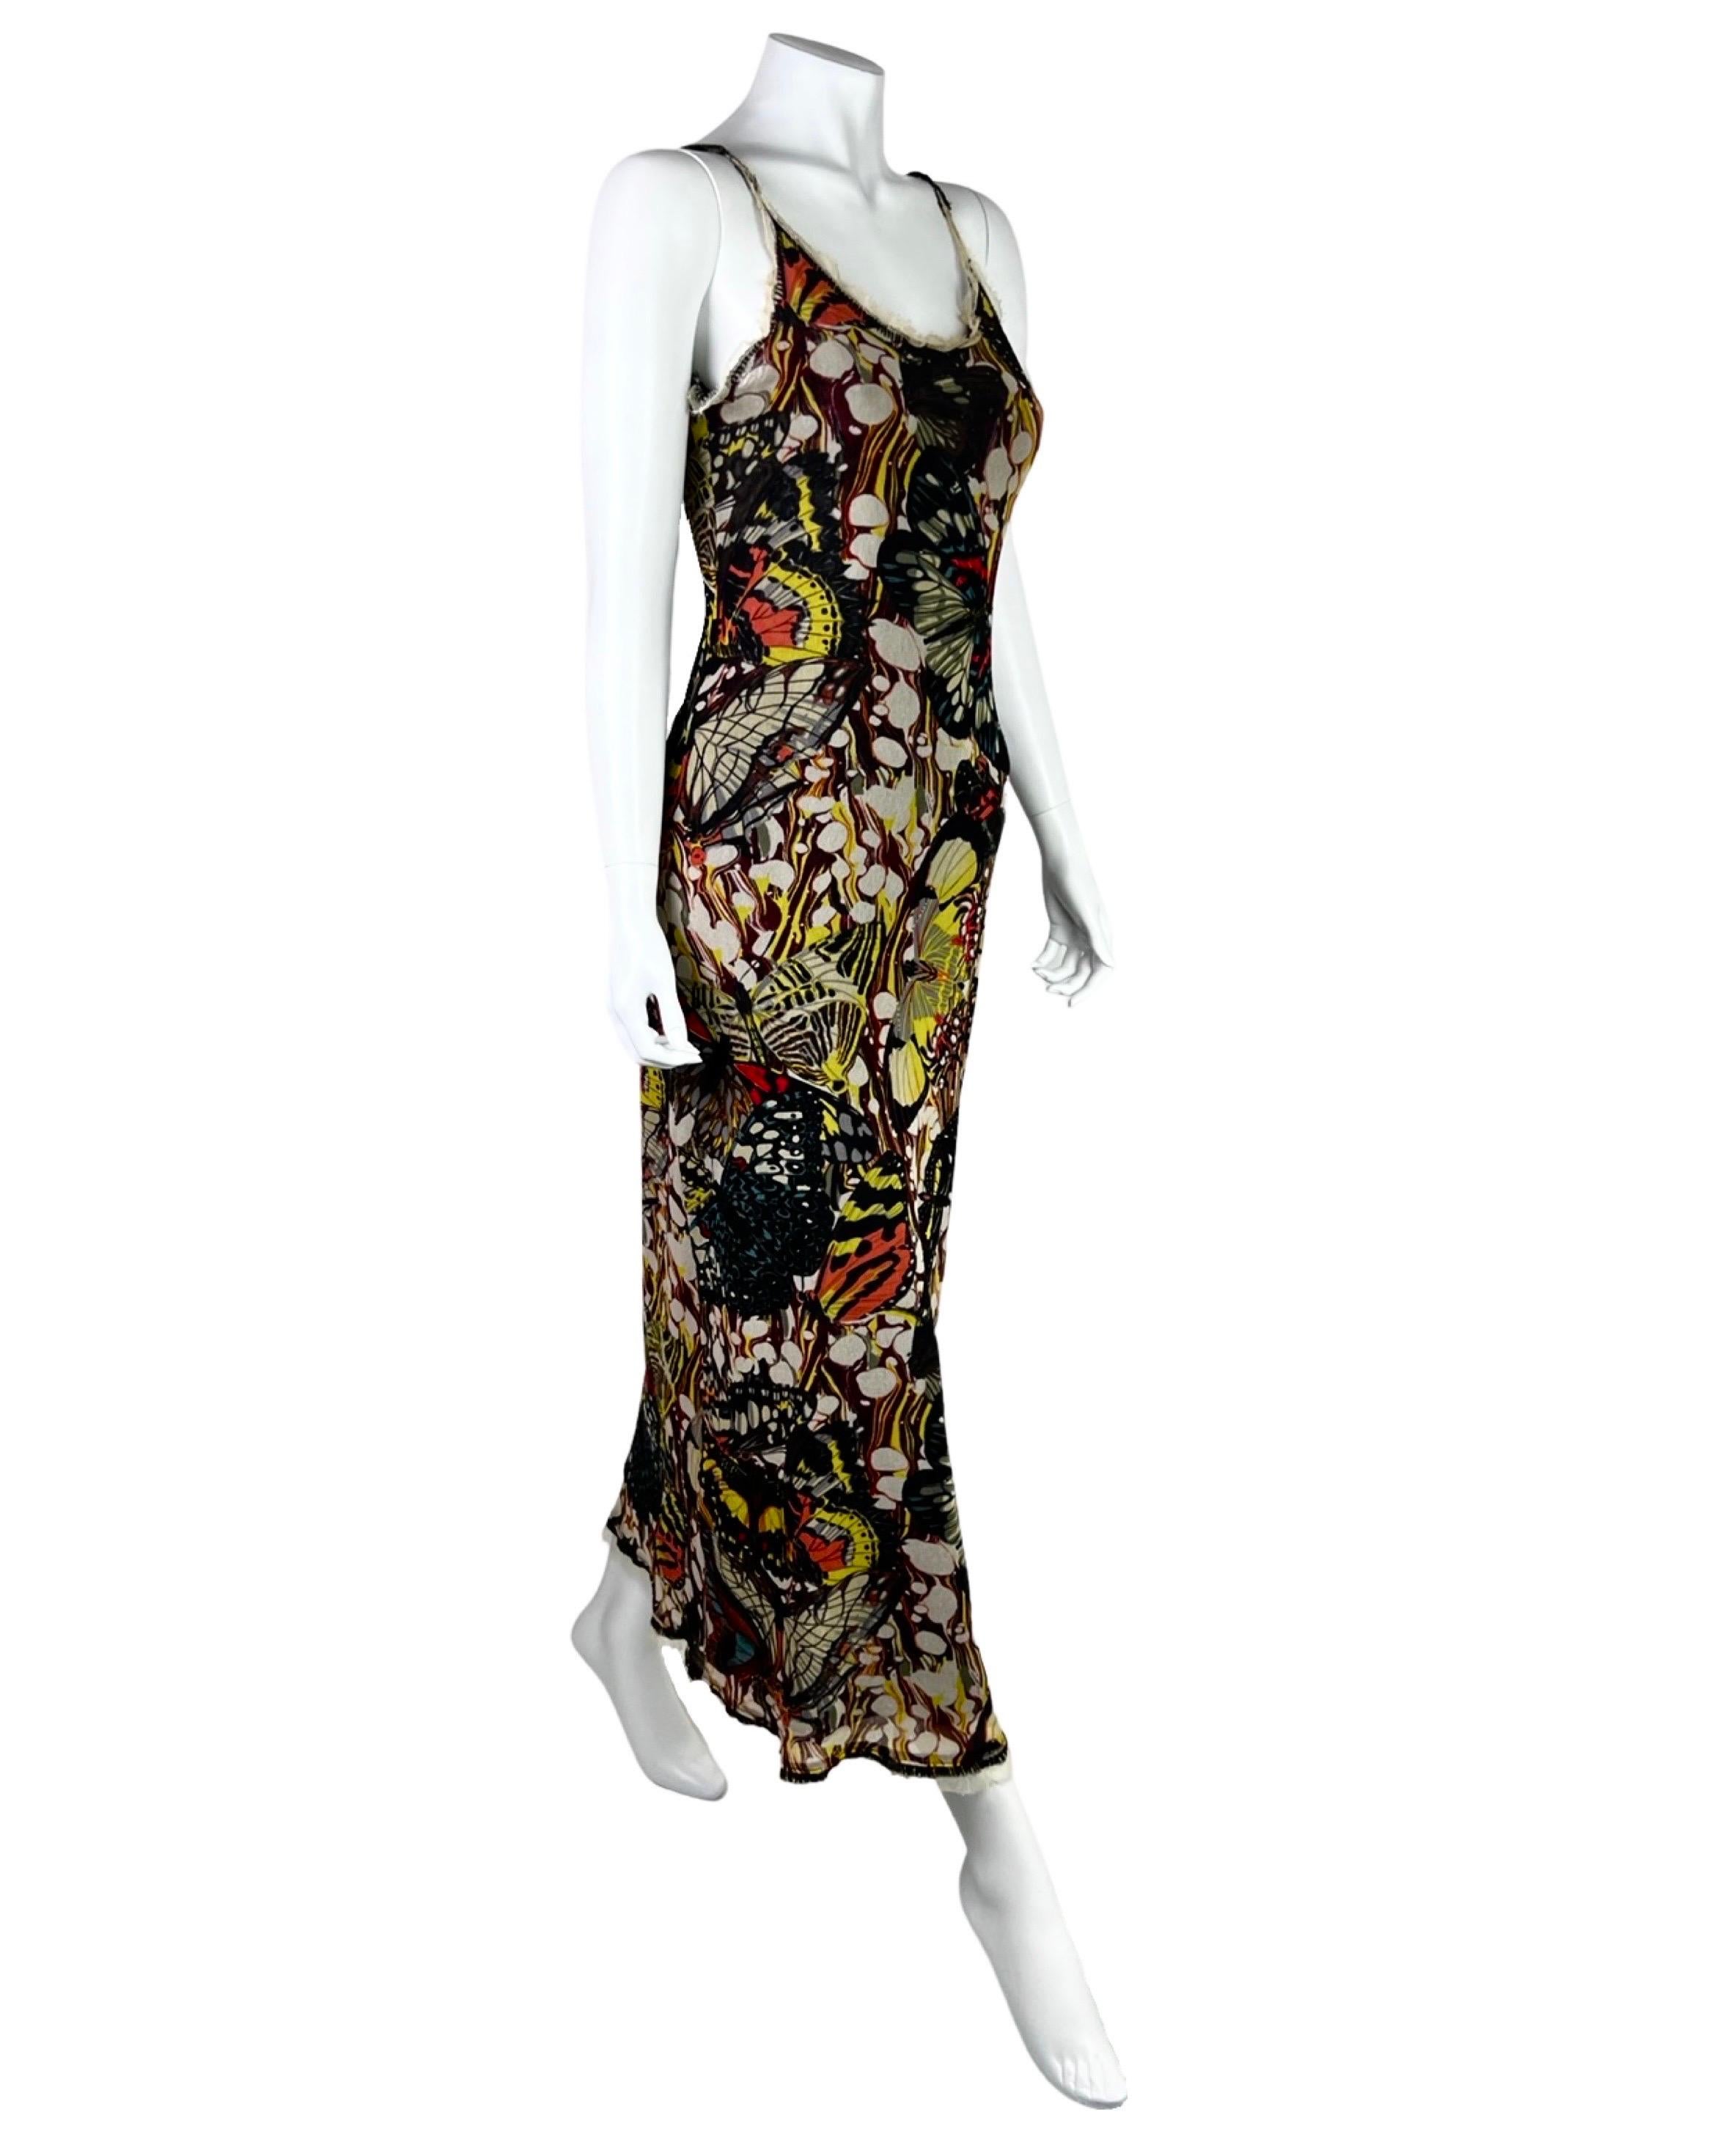 One of the most highly sought-after Jean-Paul Gaultier prints in this fabulous mesh dress in Size Large. Would fit anyone between M and XL. 

Excellent vintage condition.